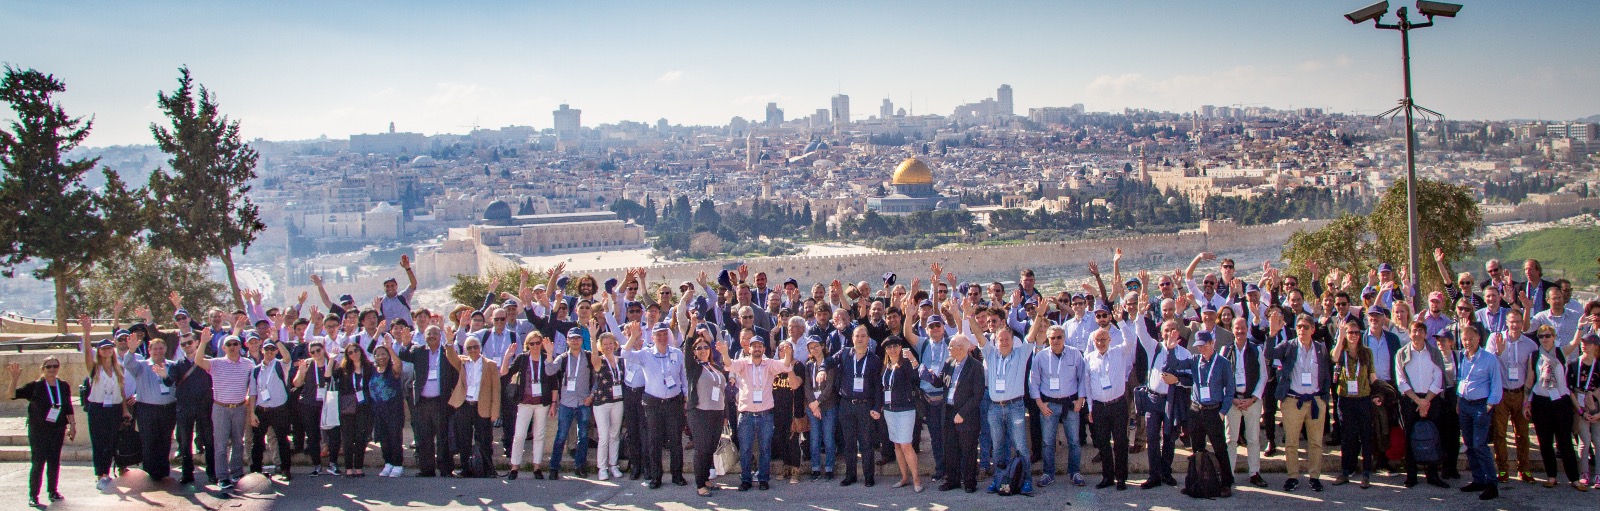 At the summit, international participants from leading cancer centers discussed the application of Alpha DaRT to various cancer types. This image shows the participants at the conference trip to Jerusalem, Israel.